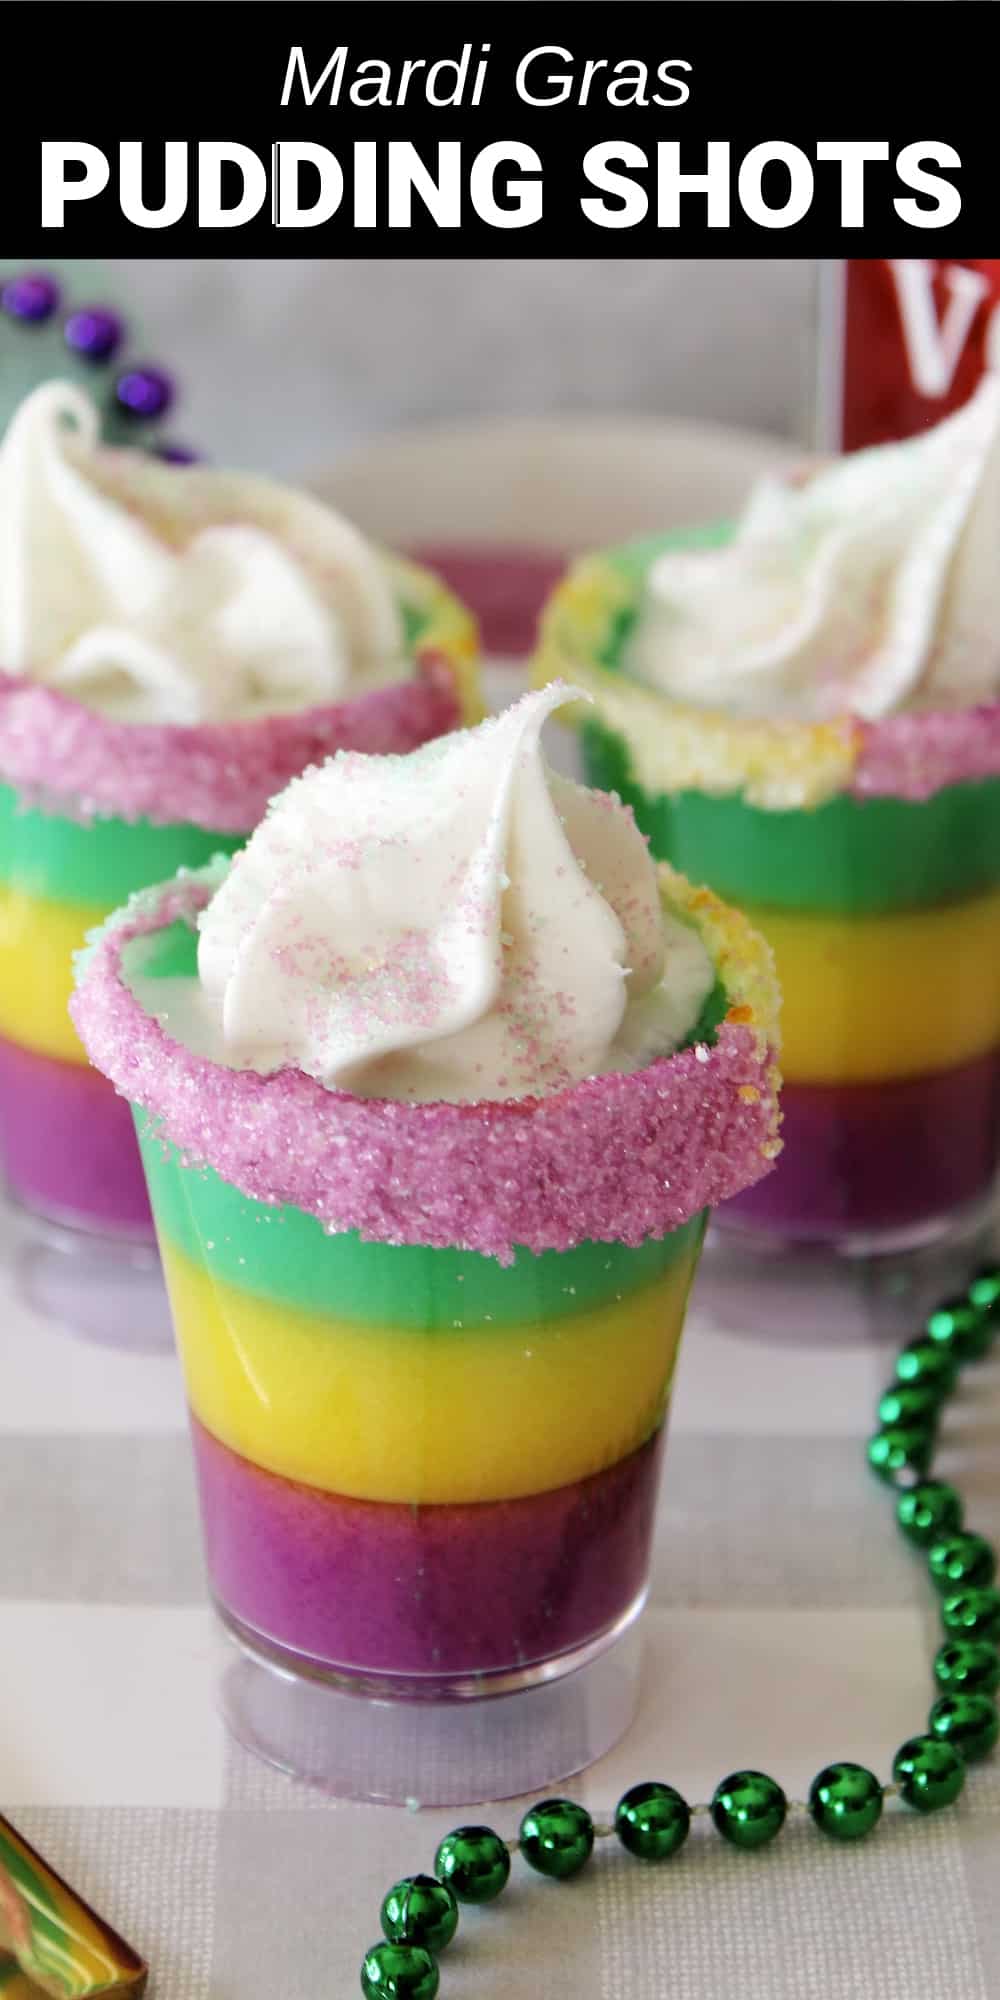 These striking and colorful Mardi Gras shots are just the treat you need for your next Mardi Gras party. And if you’ve never had a Mardi Gras party, this fun and easy recipe might just inspire you to throw one!